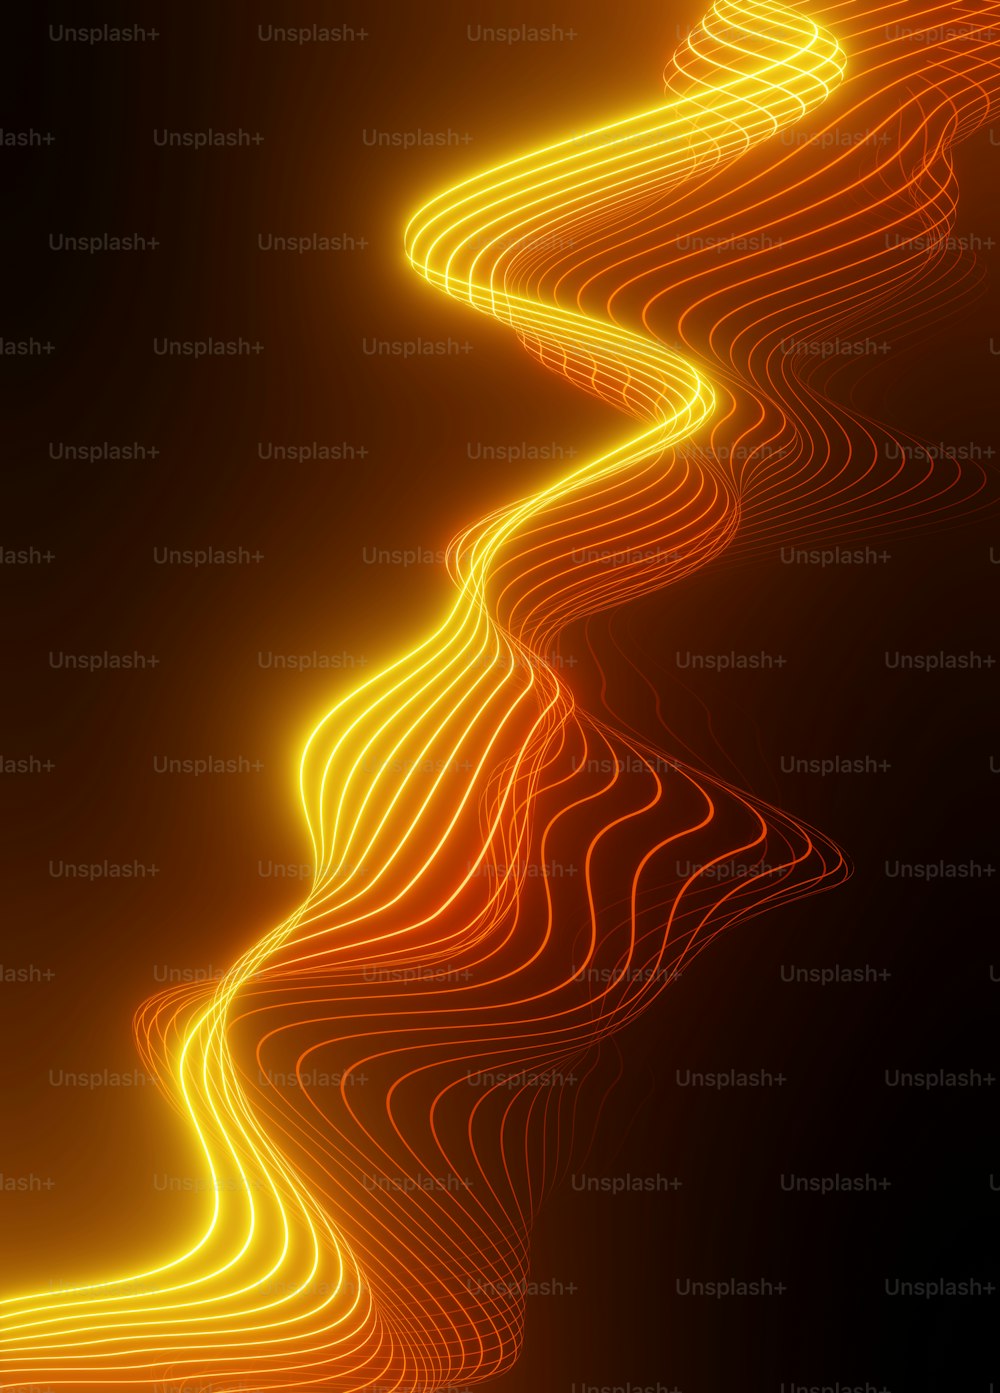 an abstract image of a wavy orange line